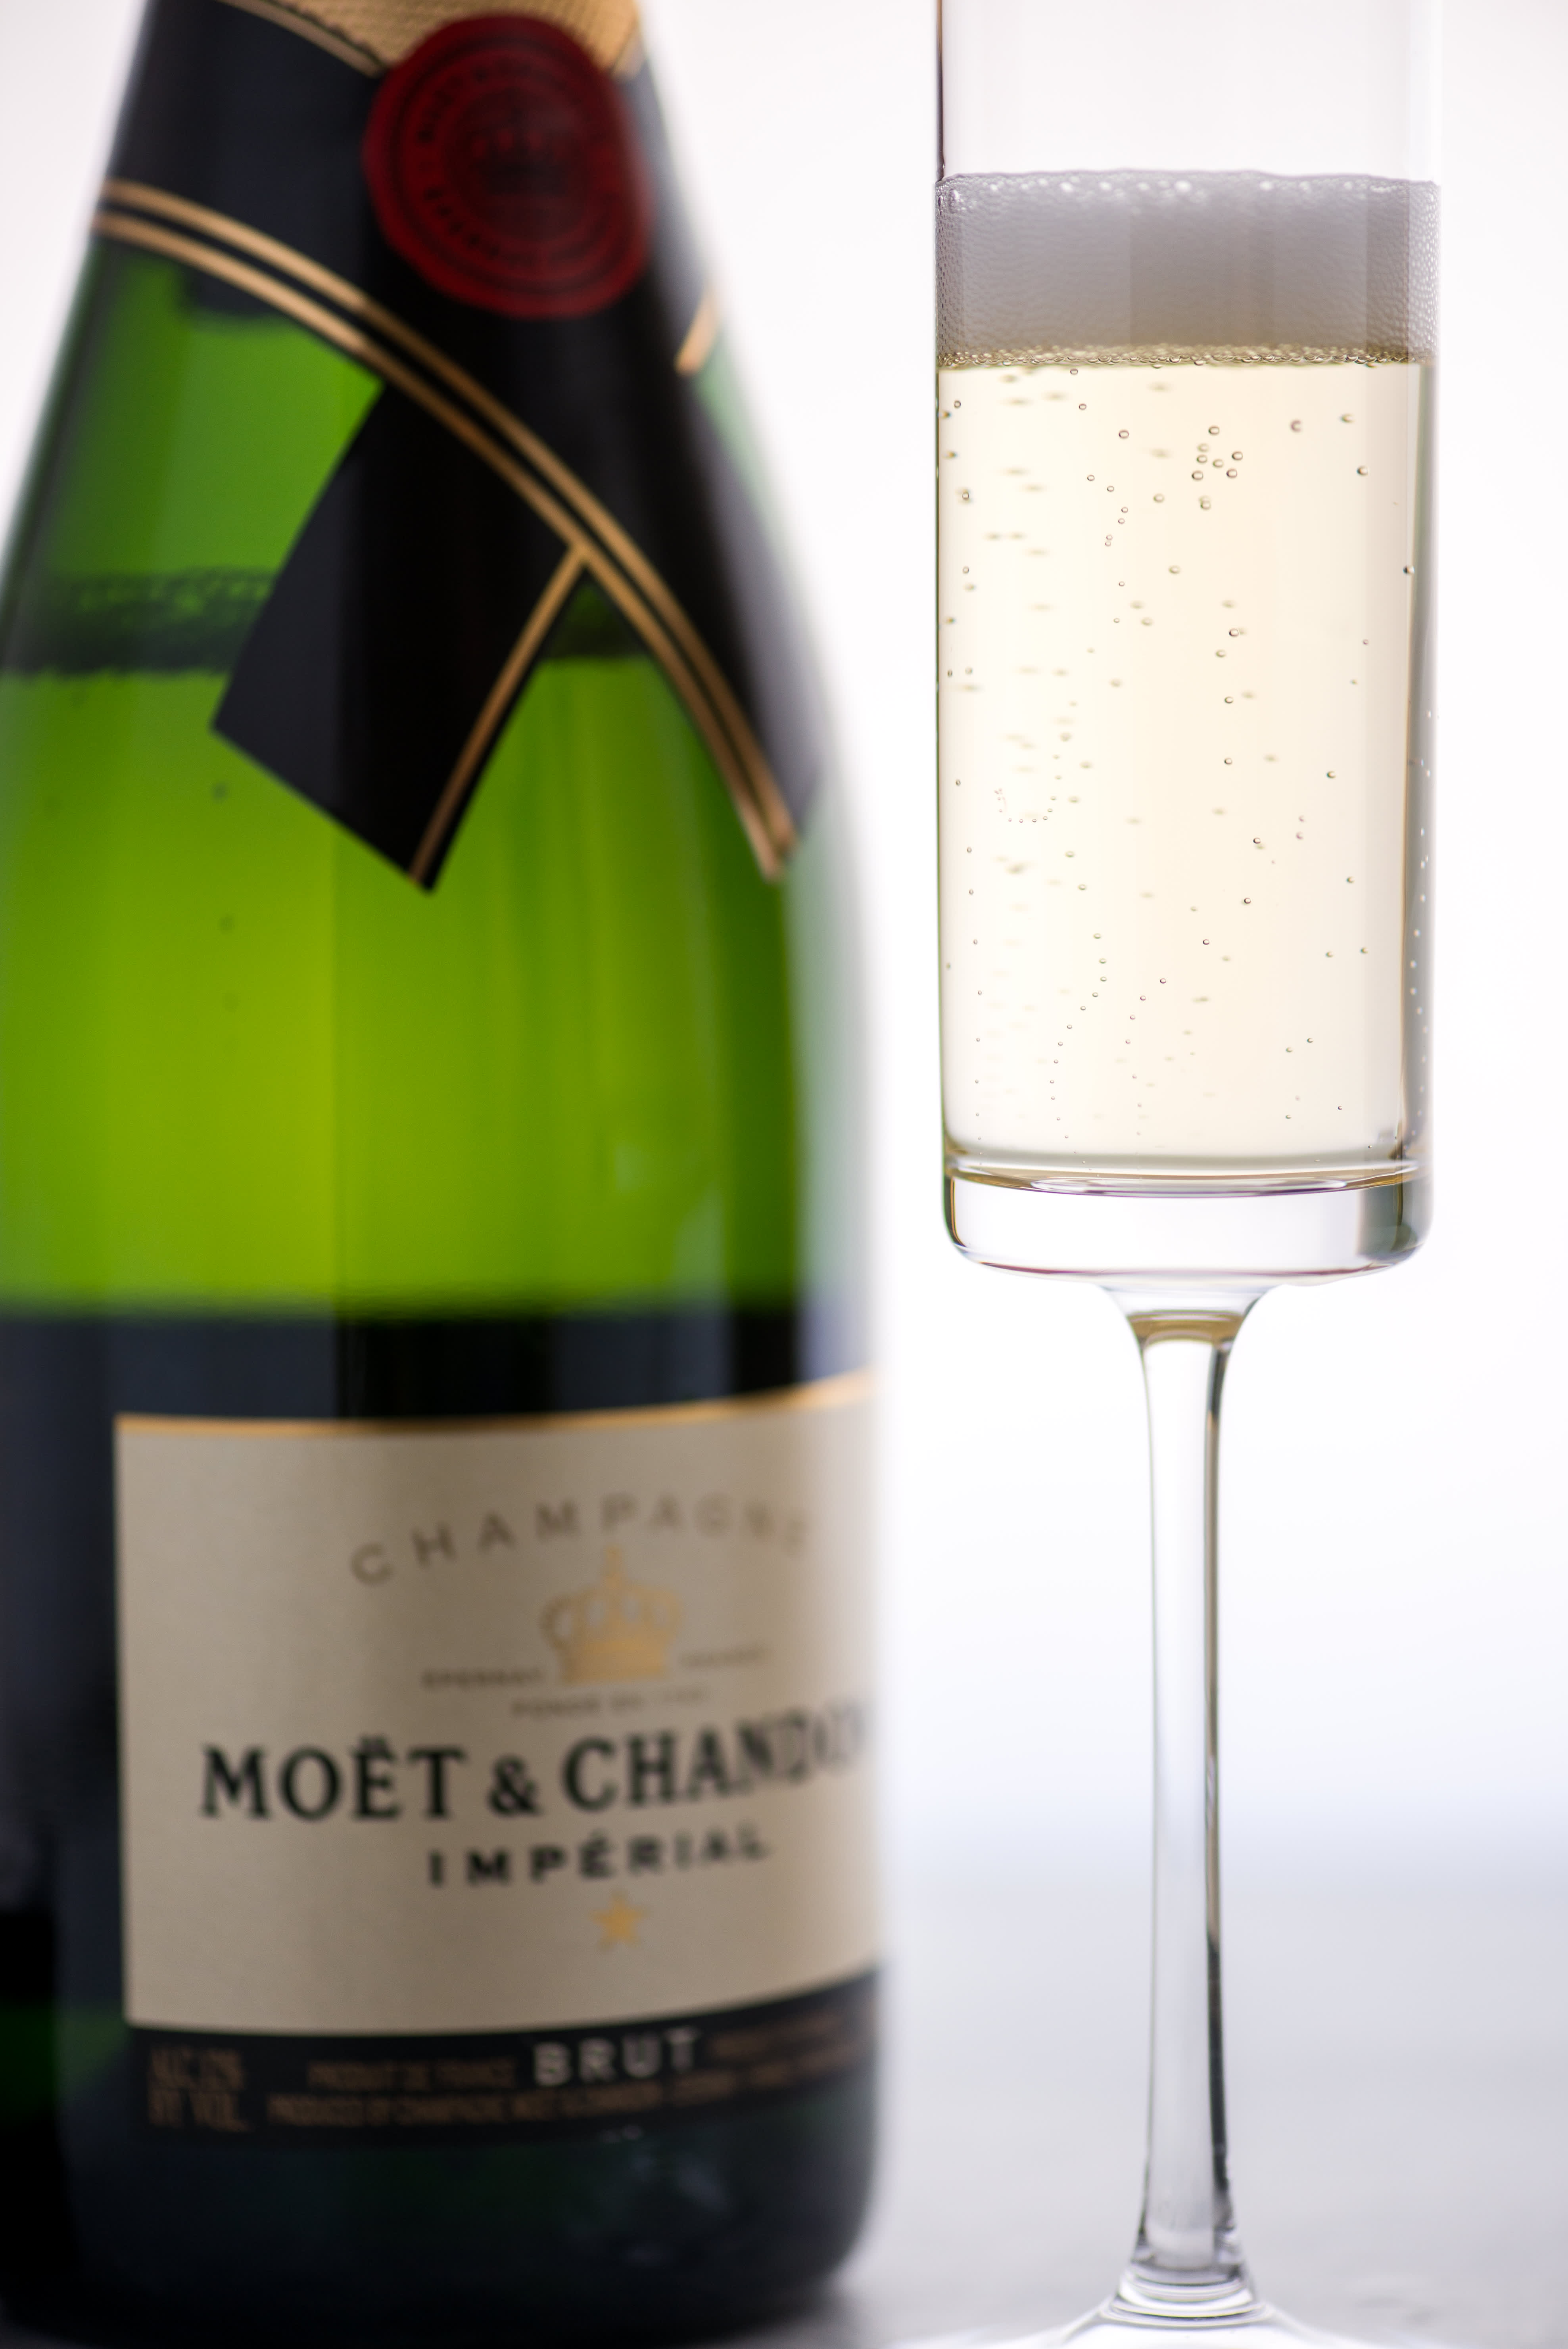 How Long Does Champagne Last After Opening?